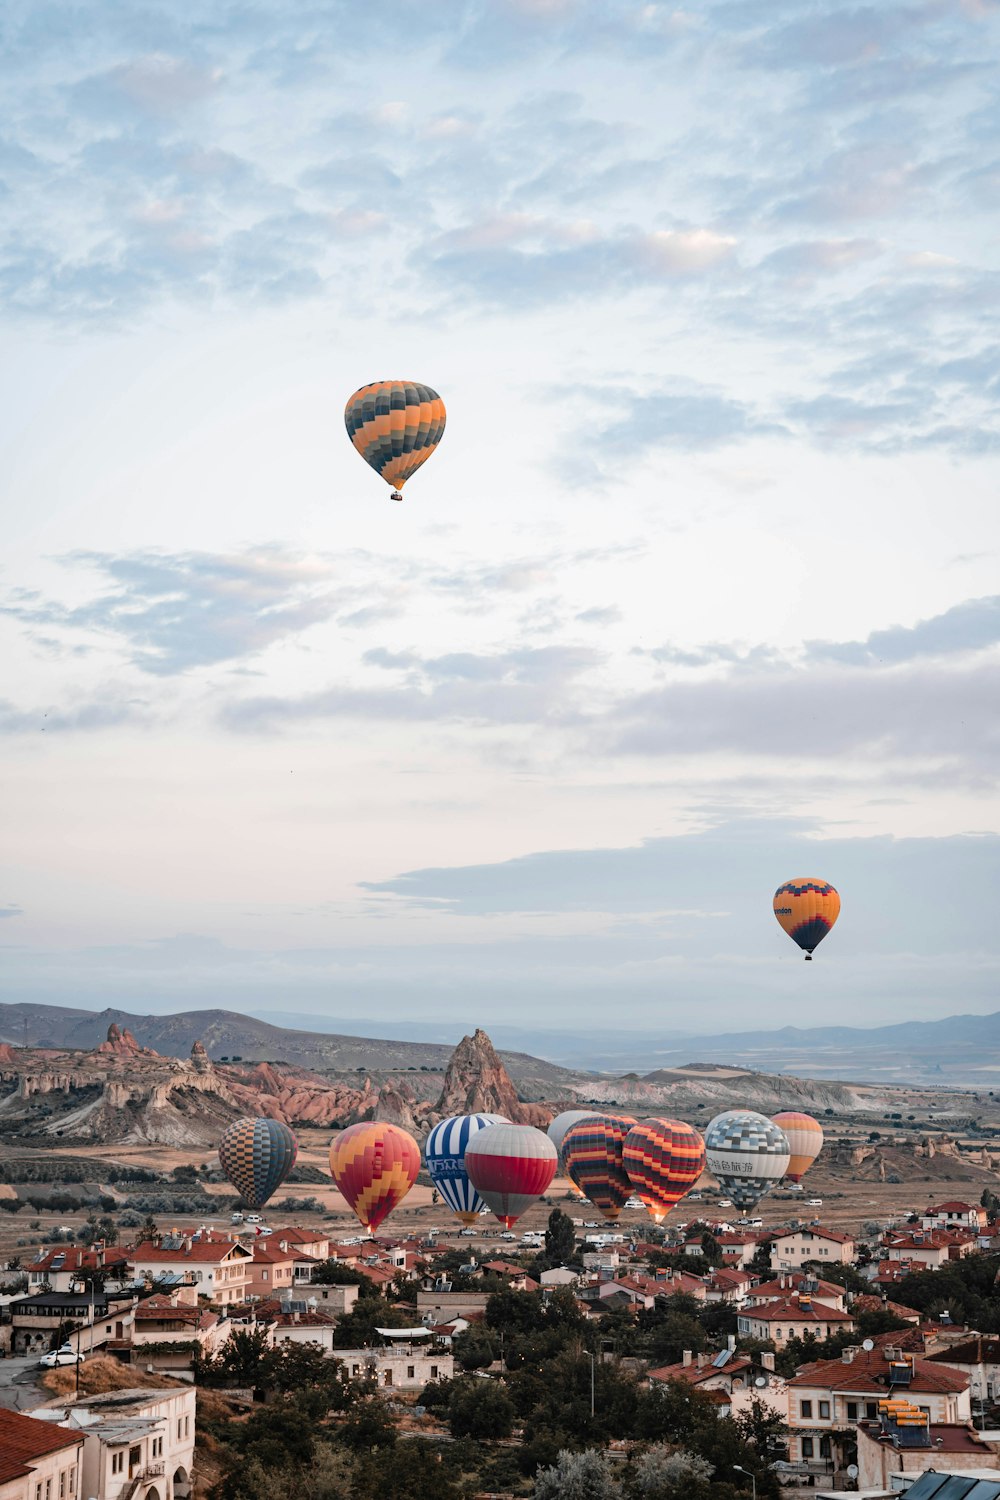 a group of hot air balloons in the sky above a city